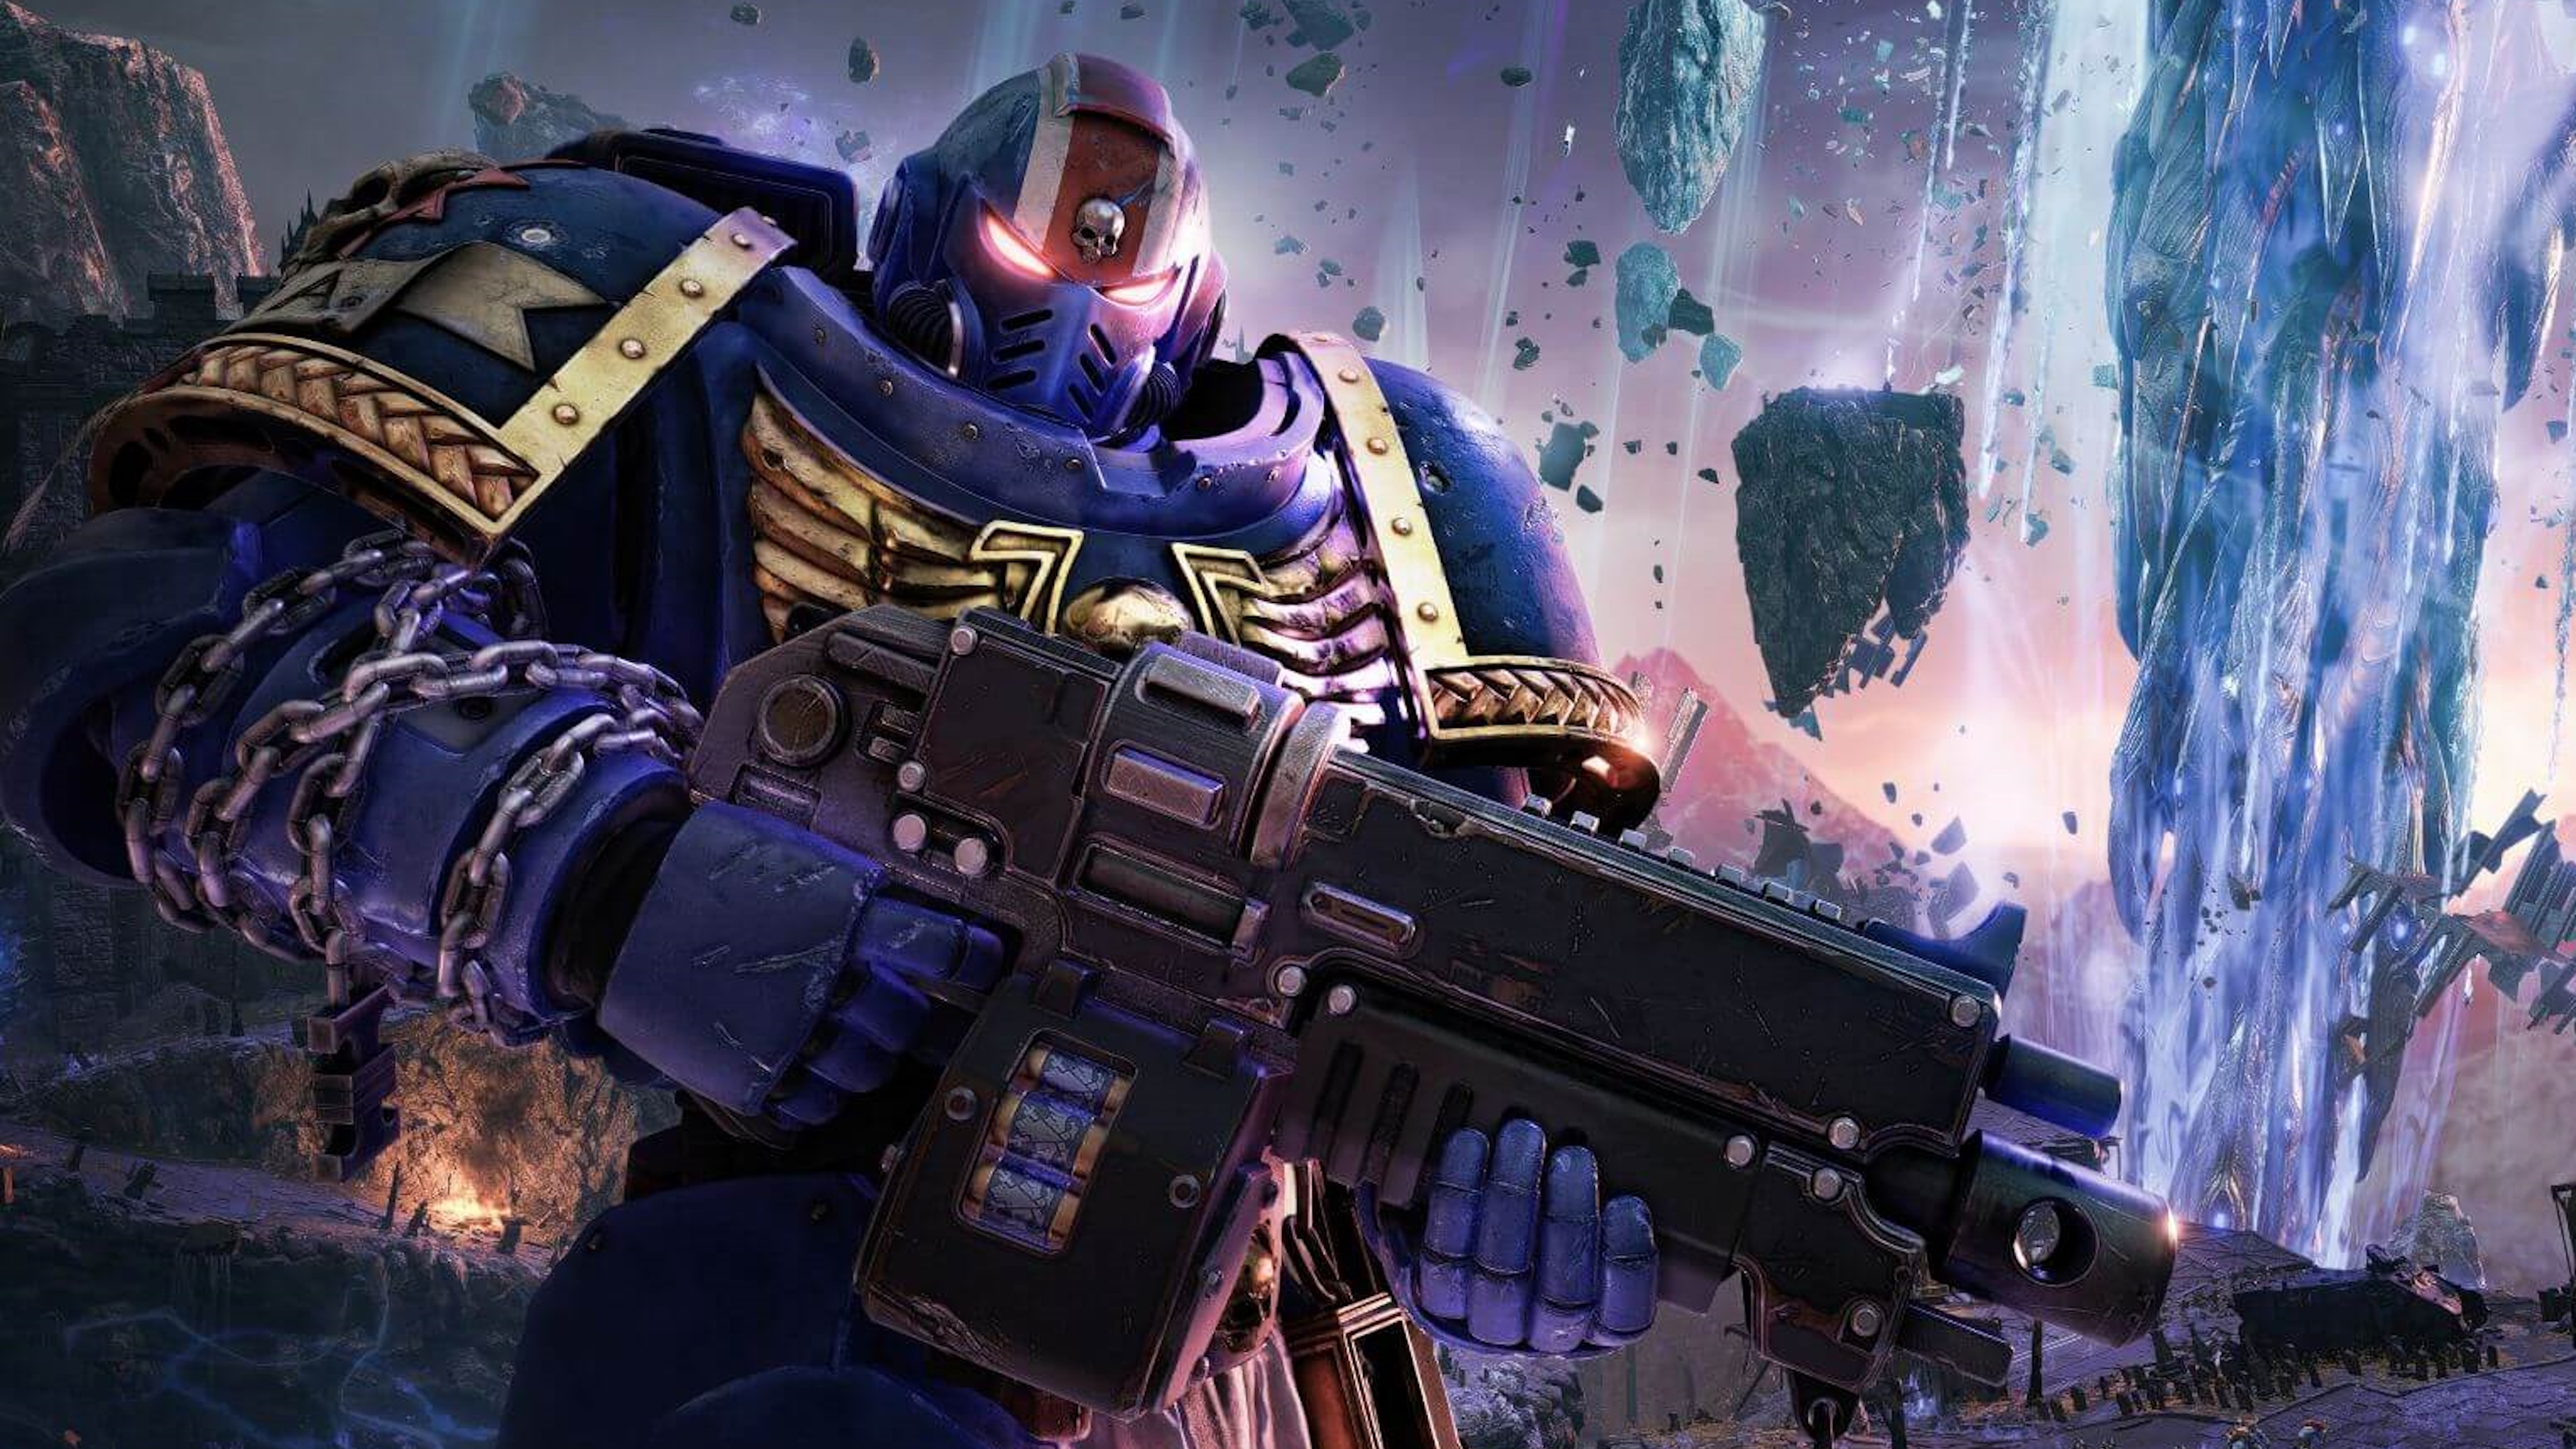 Looks like Space Marine 2 will continue the first game's grand tradition of PvP multiplayer